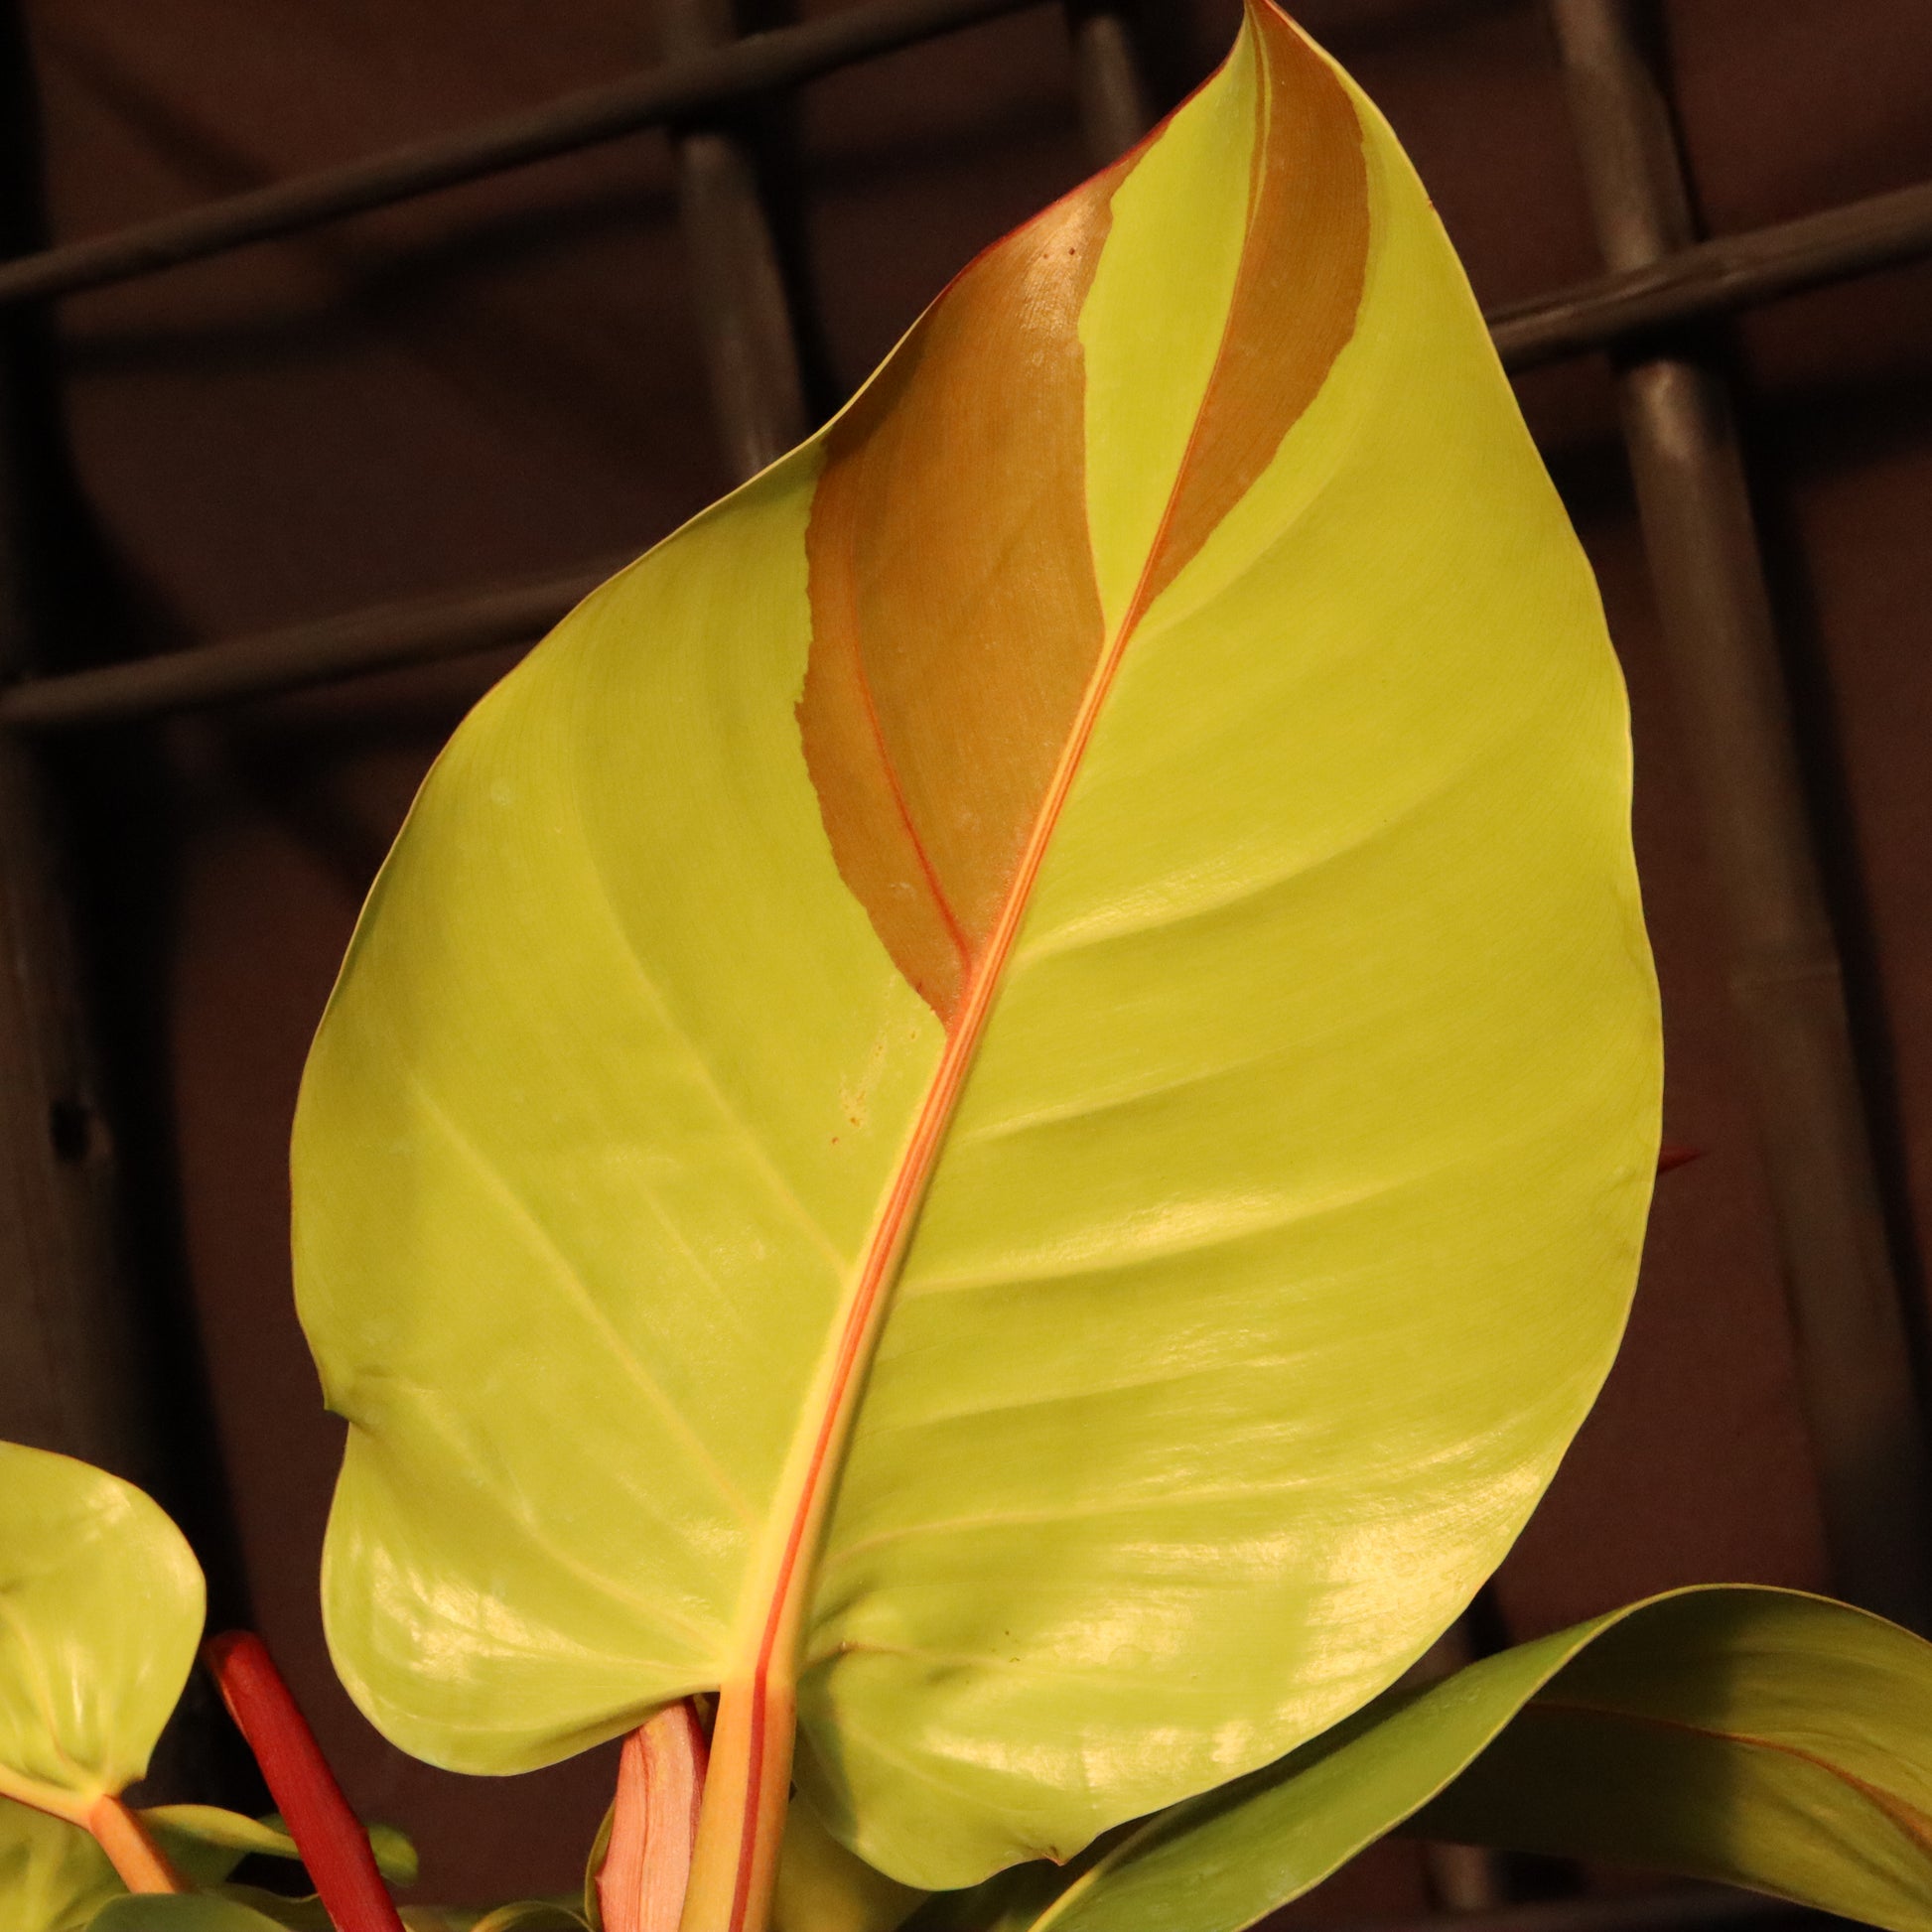 Min's Garden - This Philodendron 'Yellow Flame' has proven